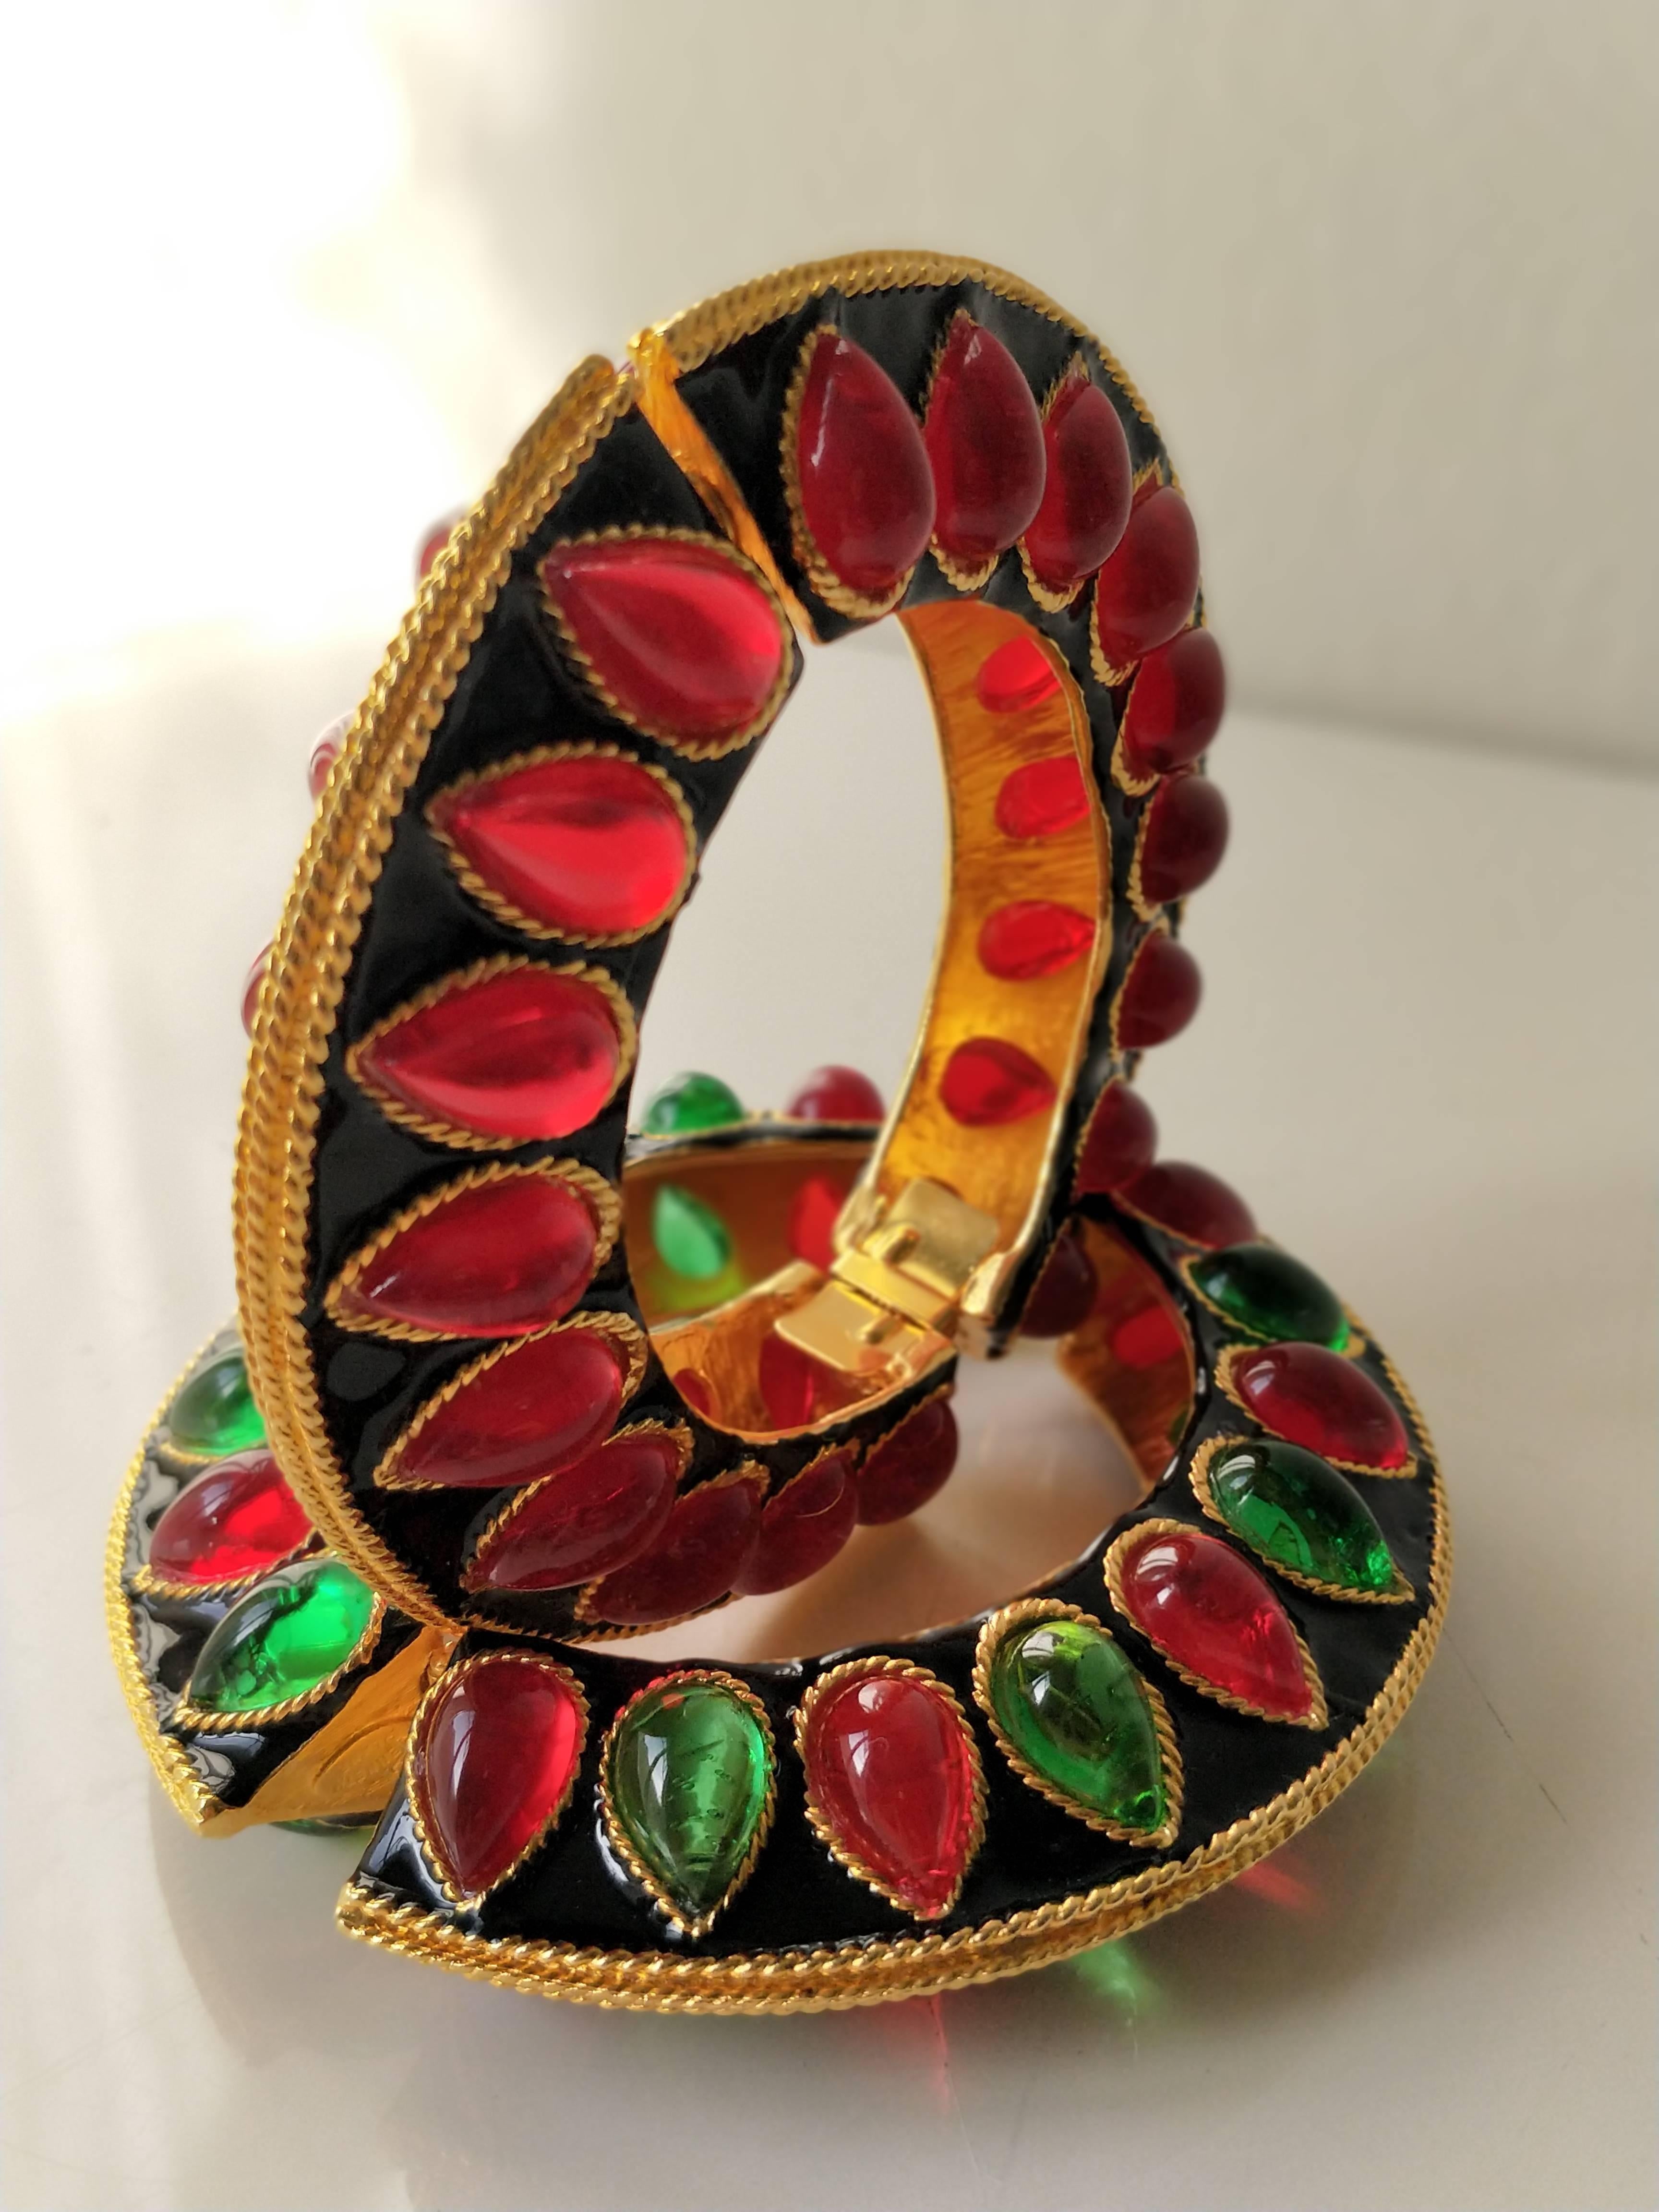 A pair of 1980s Kenneth J. Lane Anglo-Indian style enamel and poured glass cuff bracelets. Spring-loaded hinge. Watermelon seed shaped poured glass insets in green and red. 7 inch interior measurement.